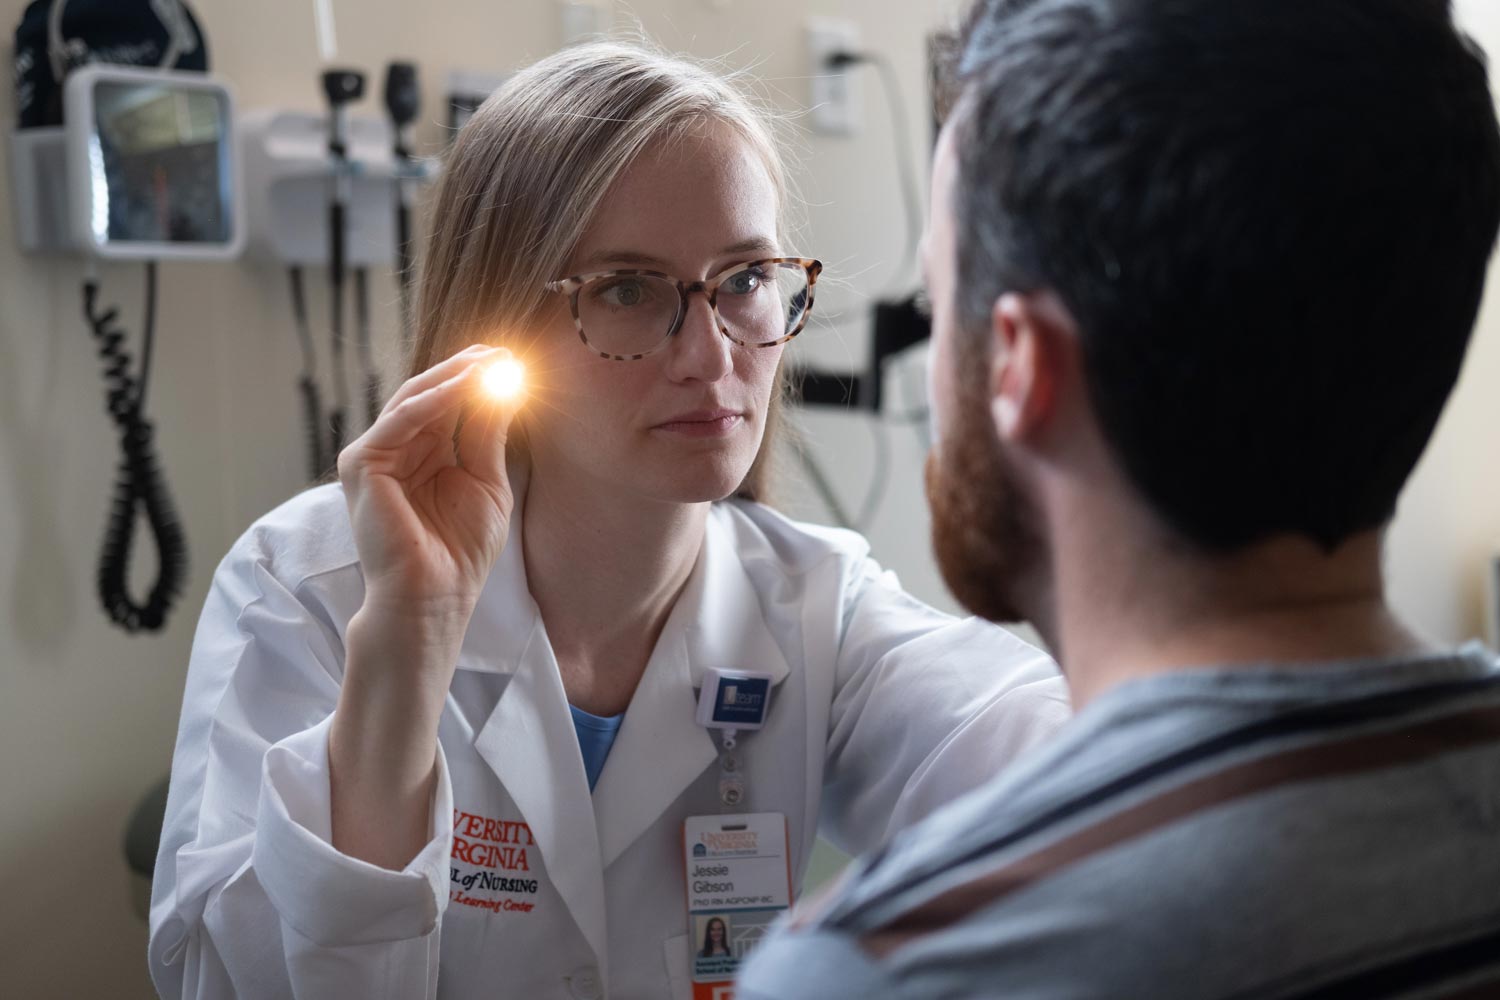 Medical Professional shining a light into the eyes of a patient